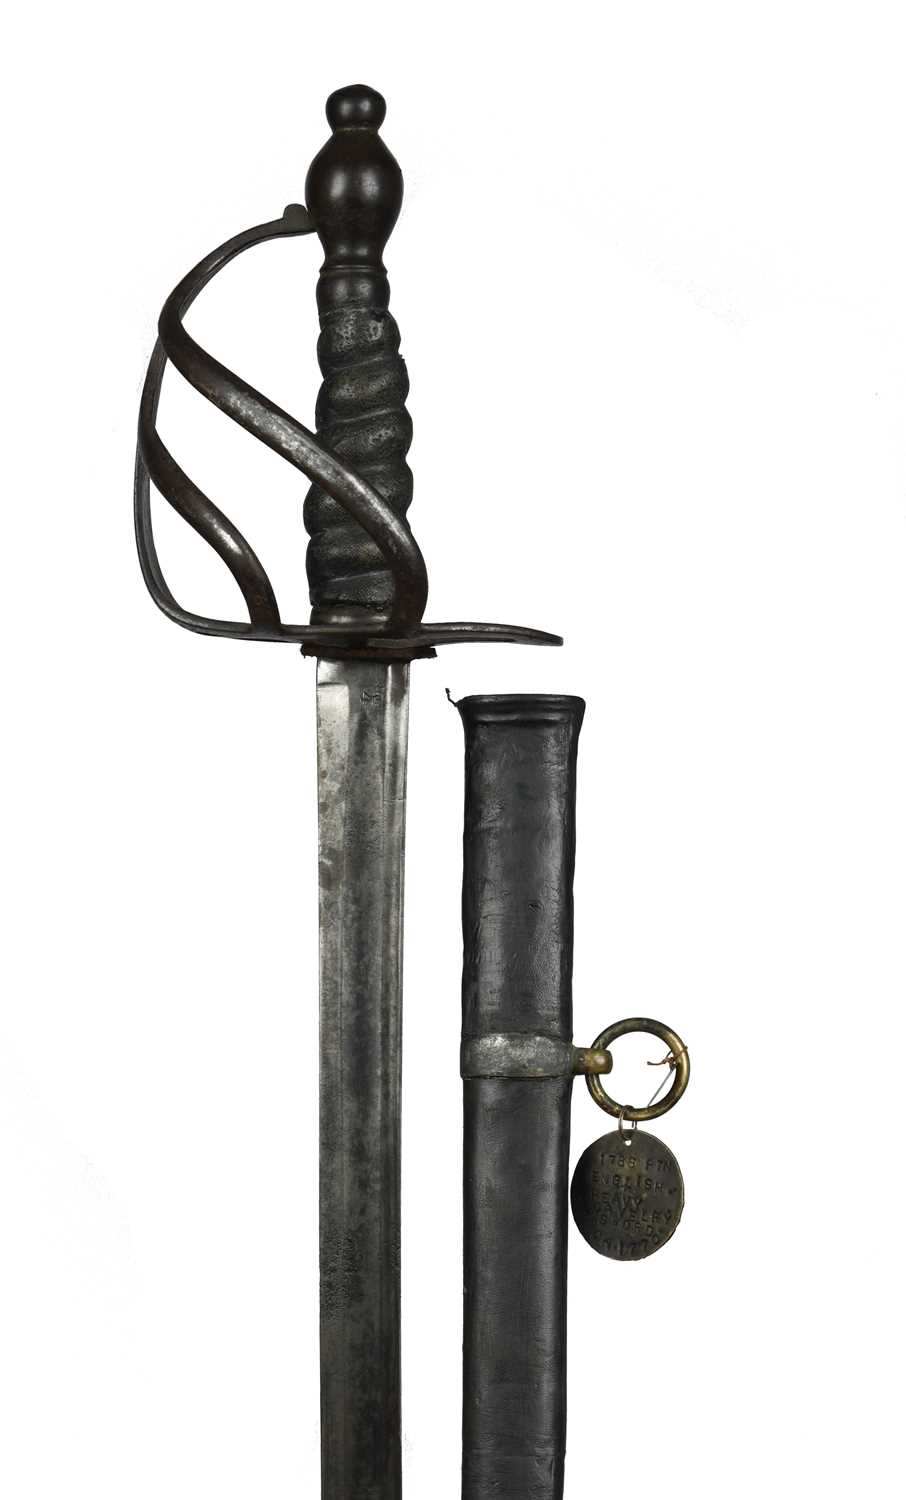 A British 1788 pattern heavy cavalry trooper's sword, fullered blade 36.5 in, stamped with a crowned